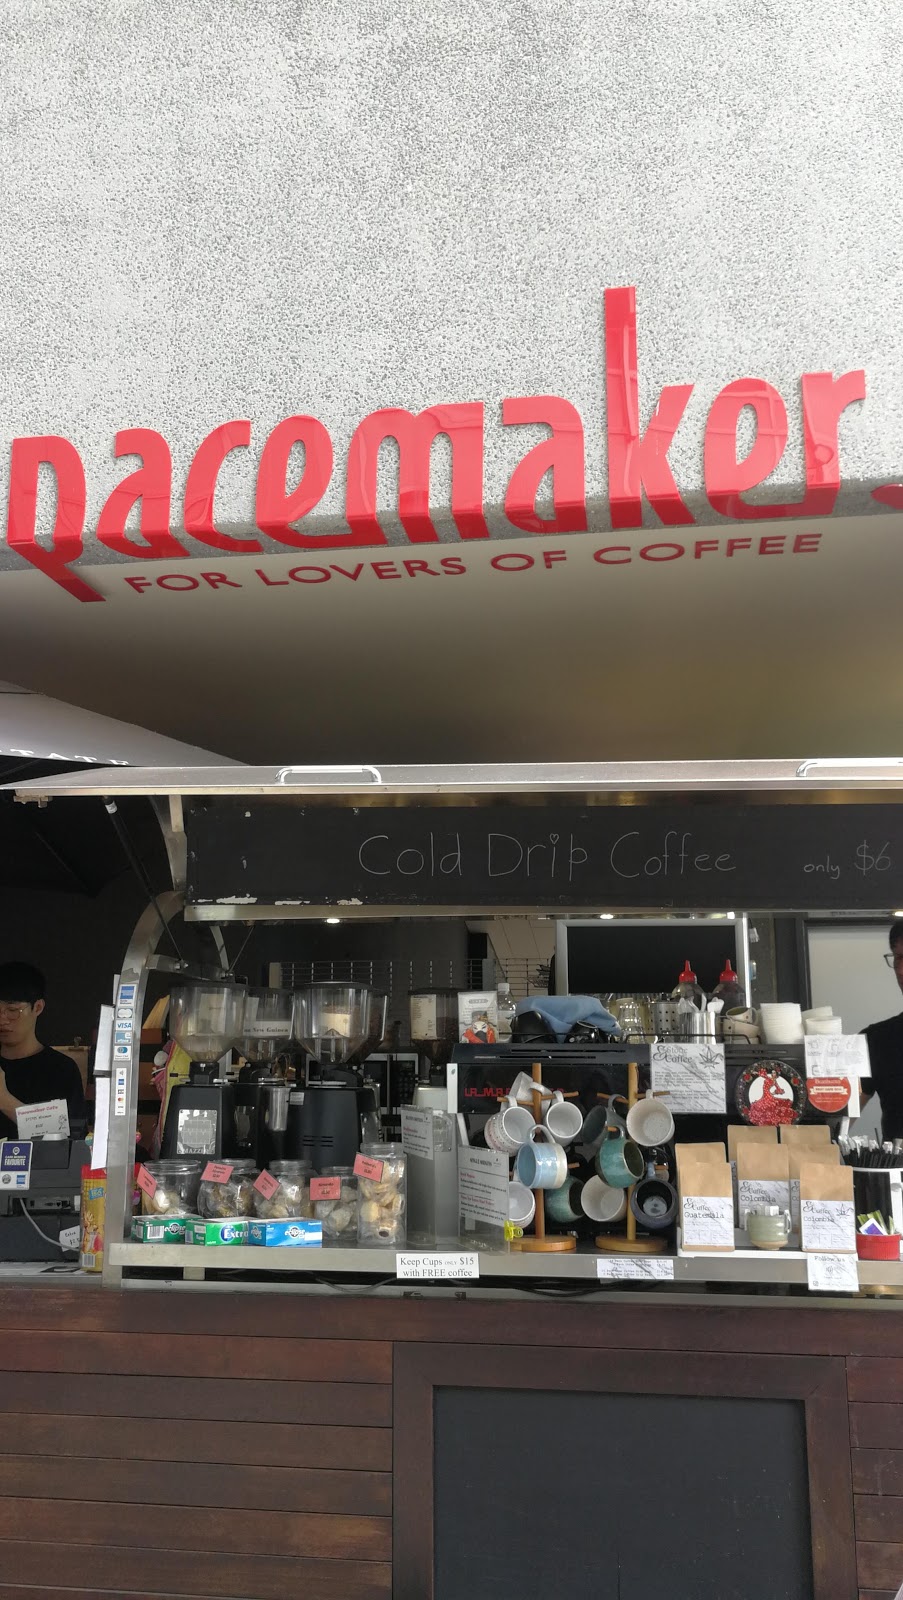 Pacemaker Cafe | cafe | 20 Cornwall St, Woolloongabba QLD 4102, Australia | 0451280004 OR +61 451 280 004